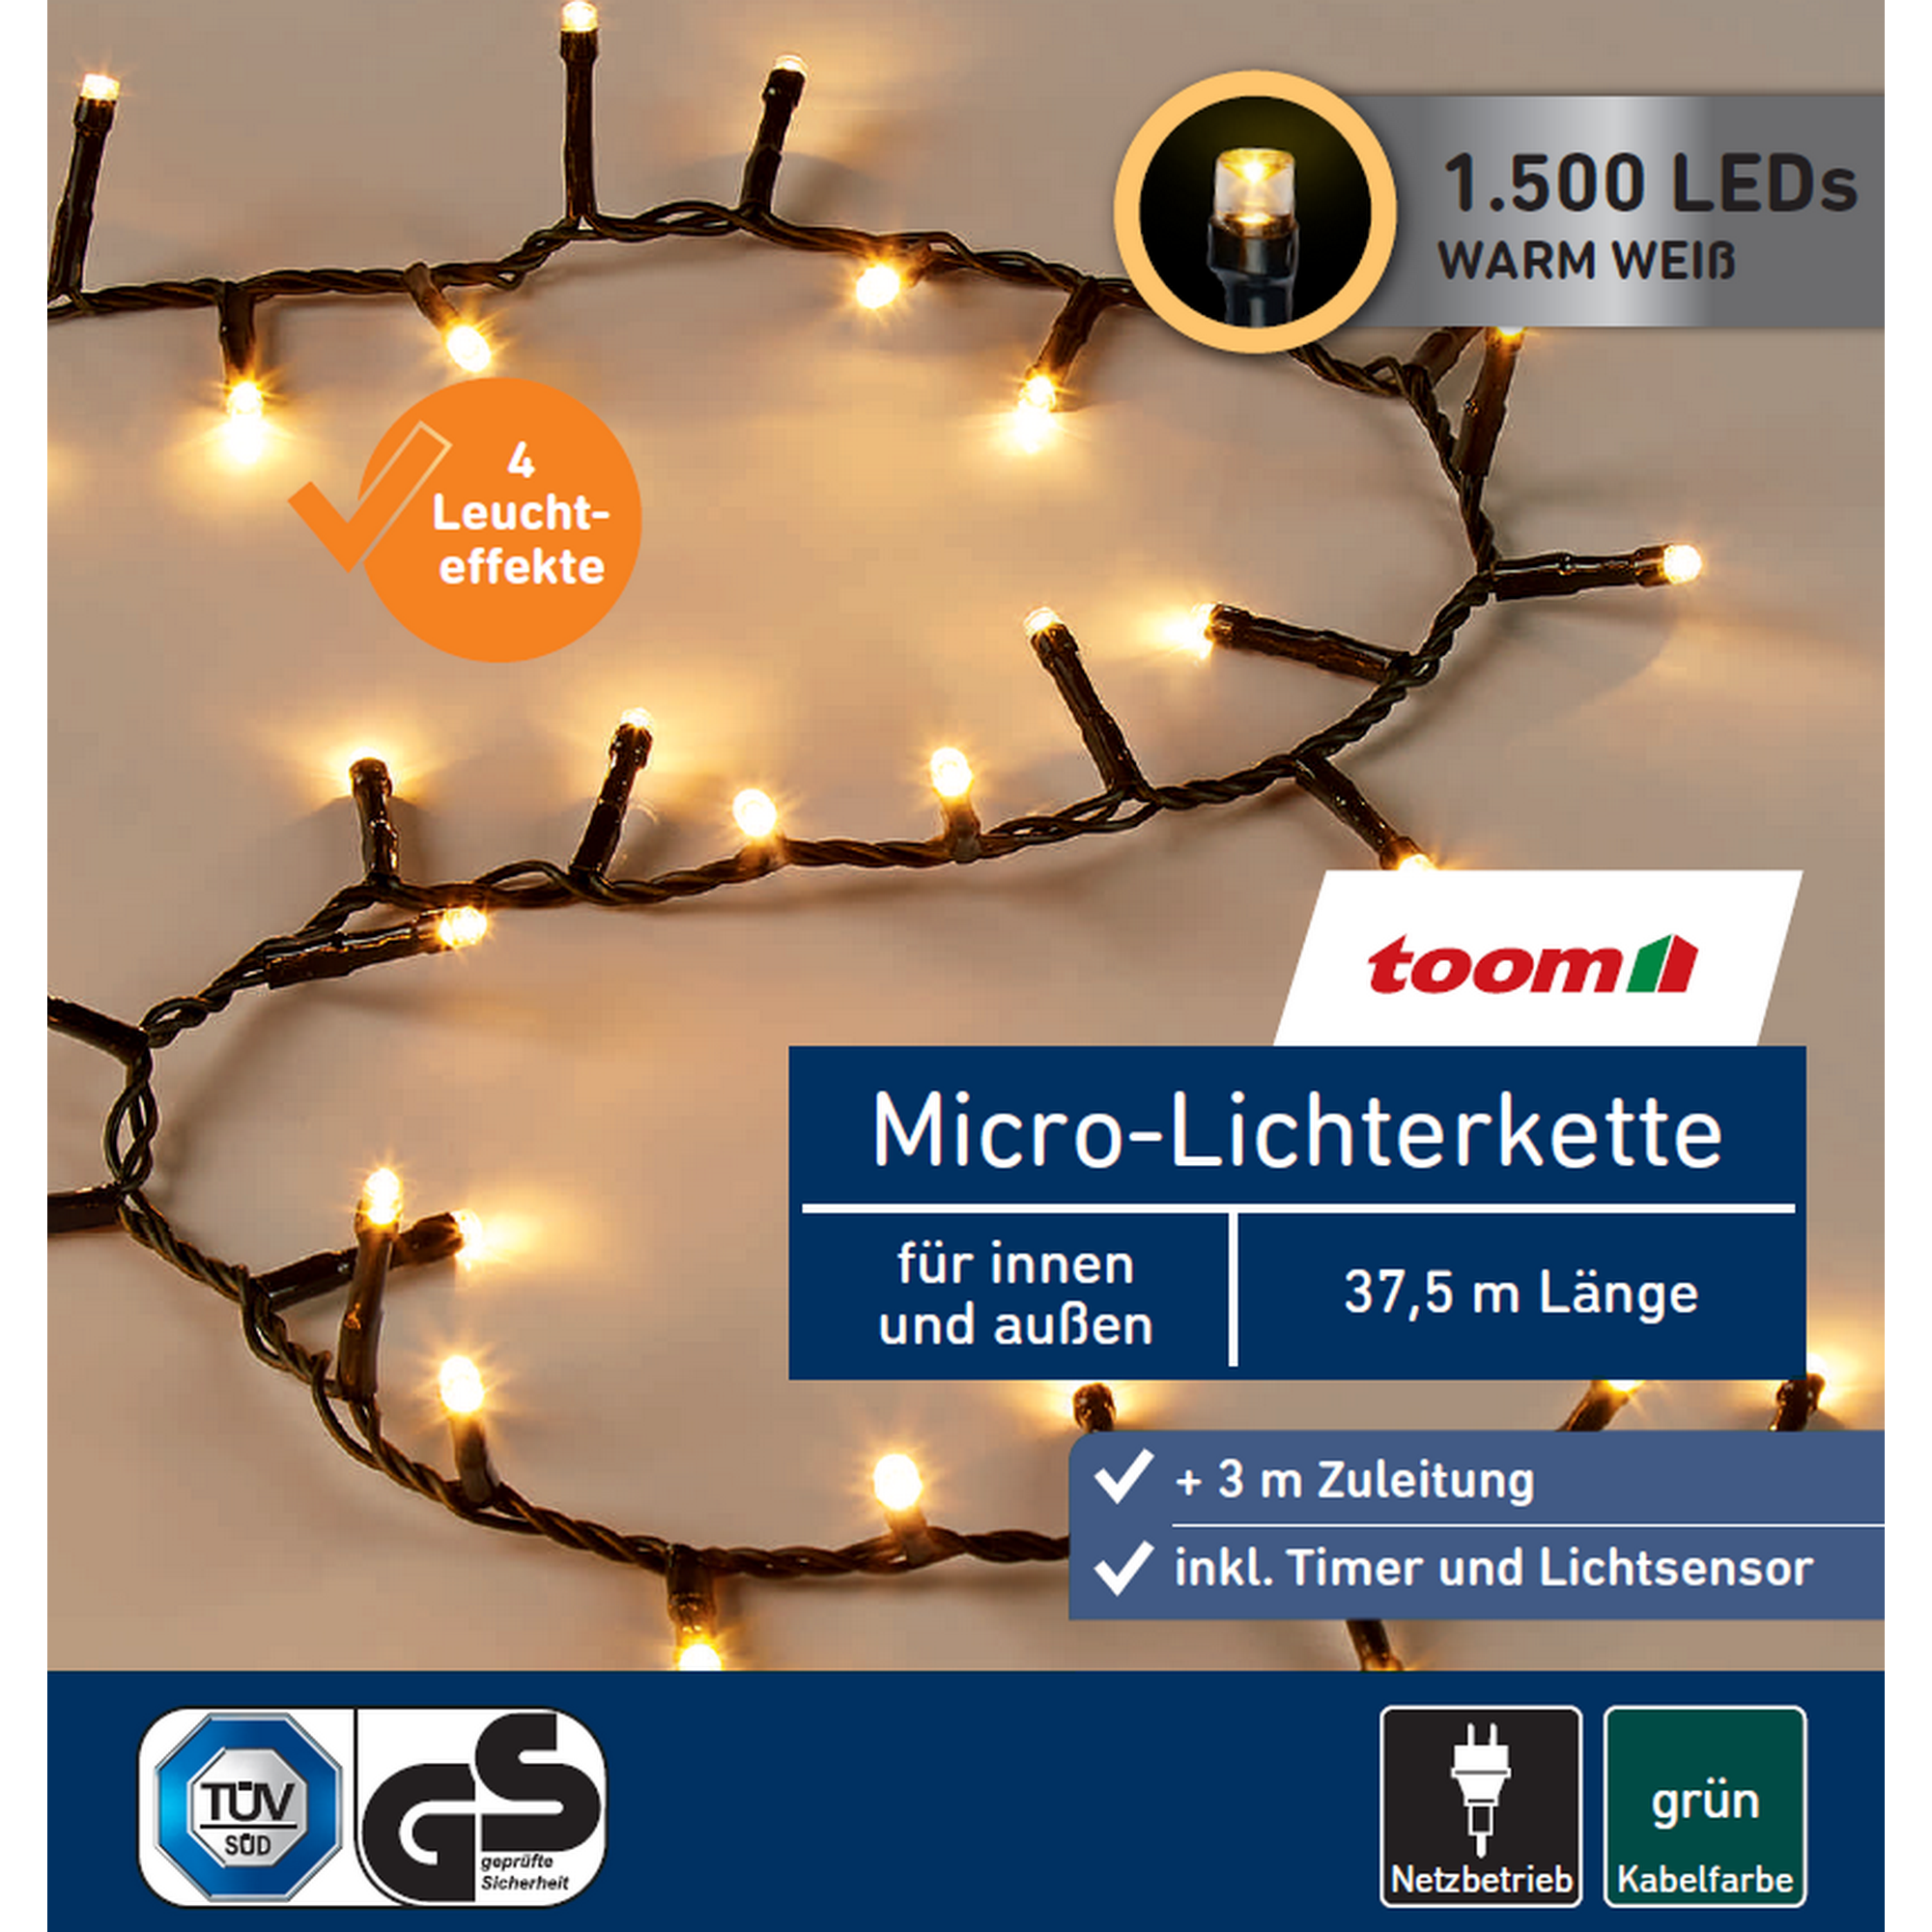 LED-Micro-Lichterkette 1500 LEDs warmweiß 3750 cm + product picture